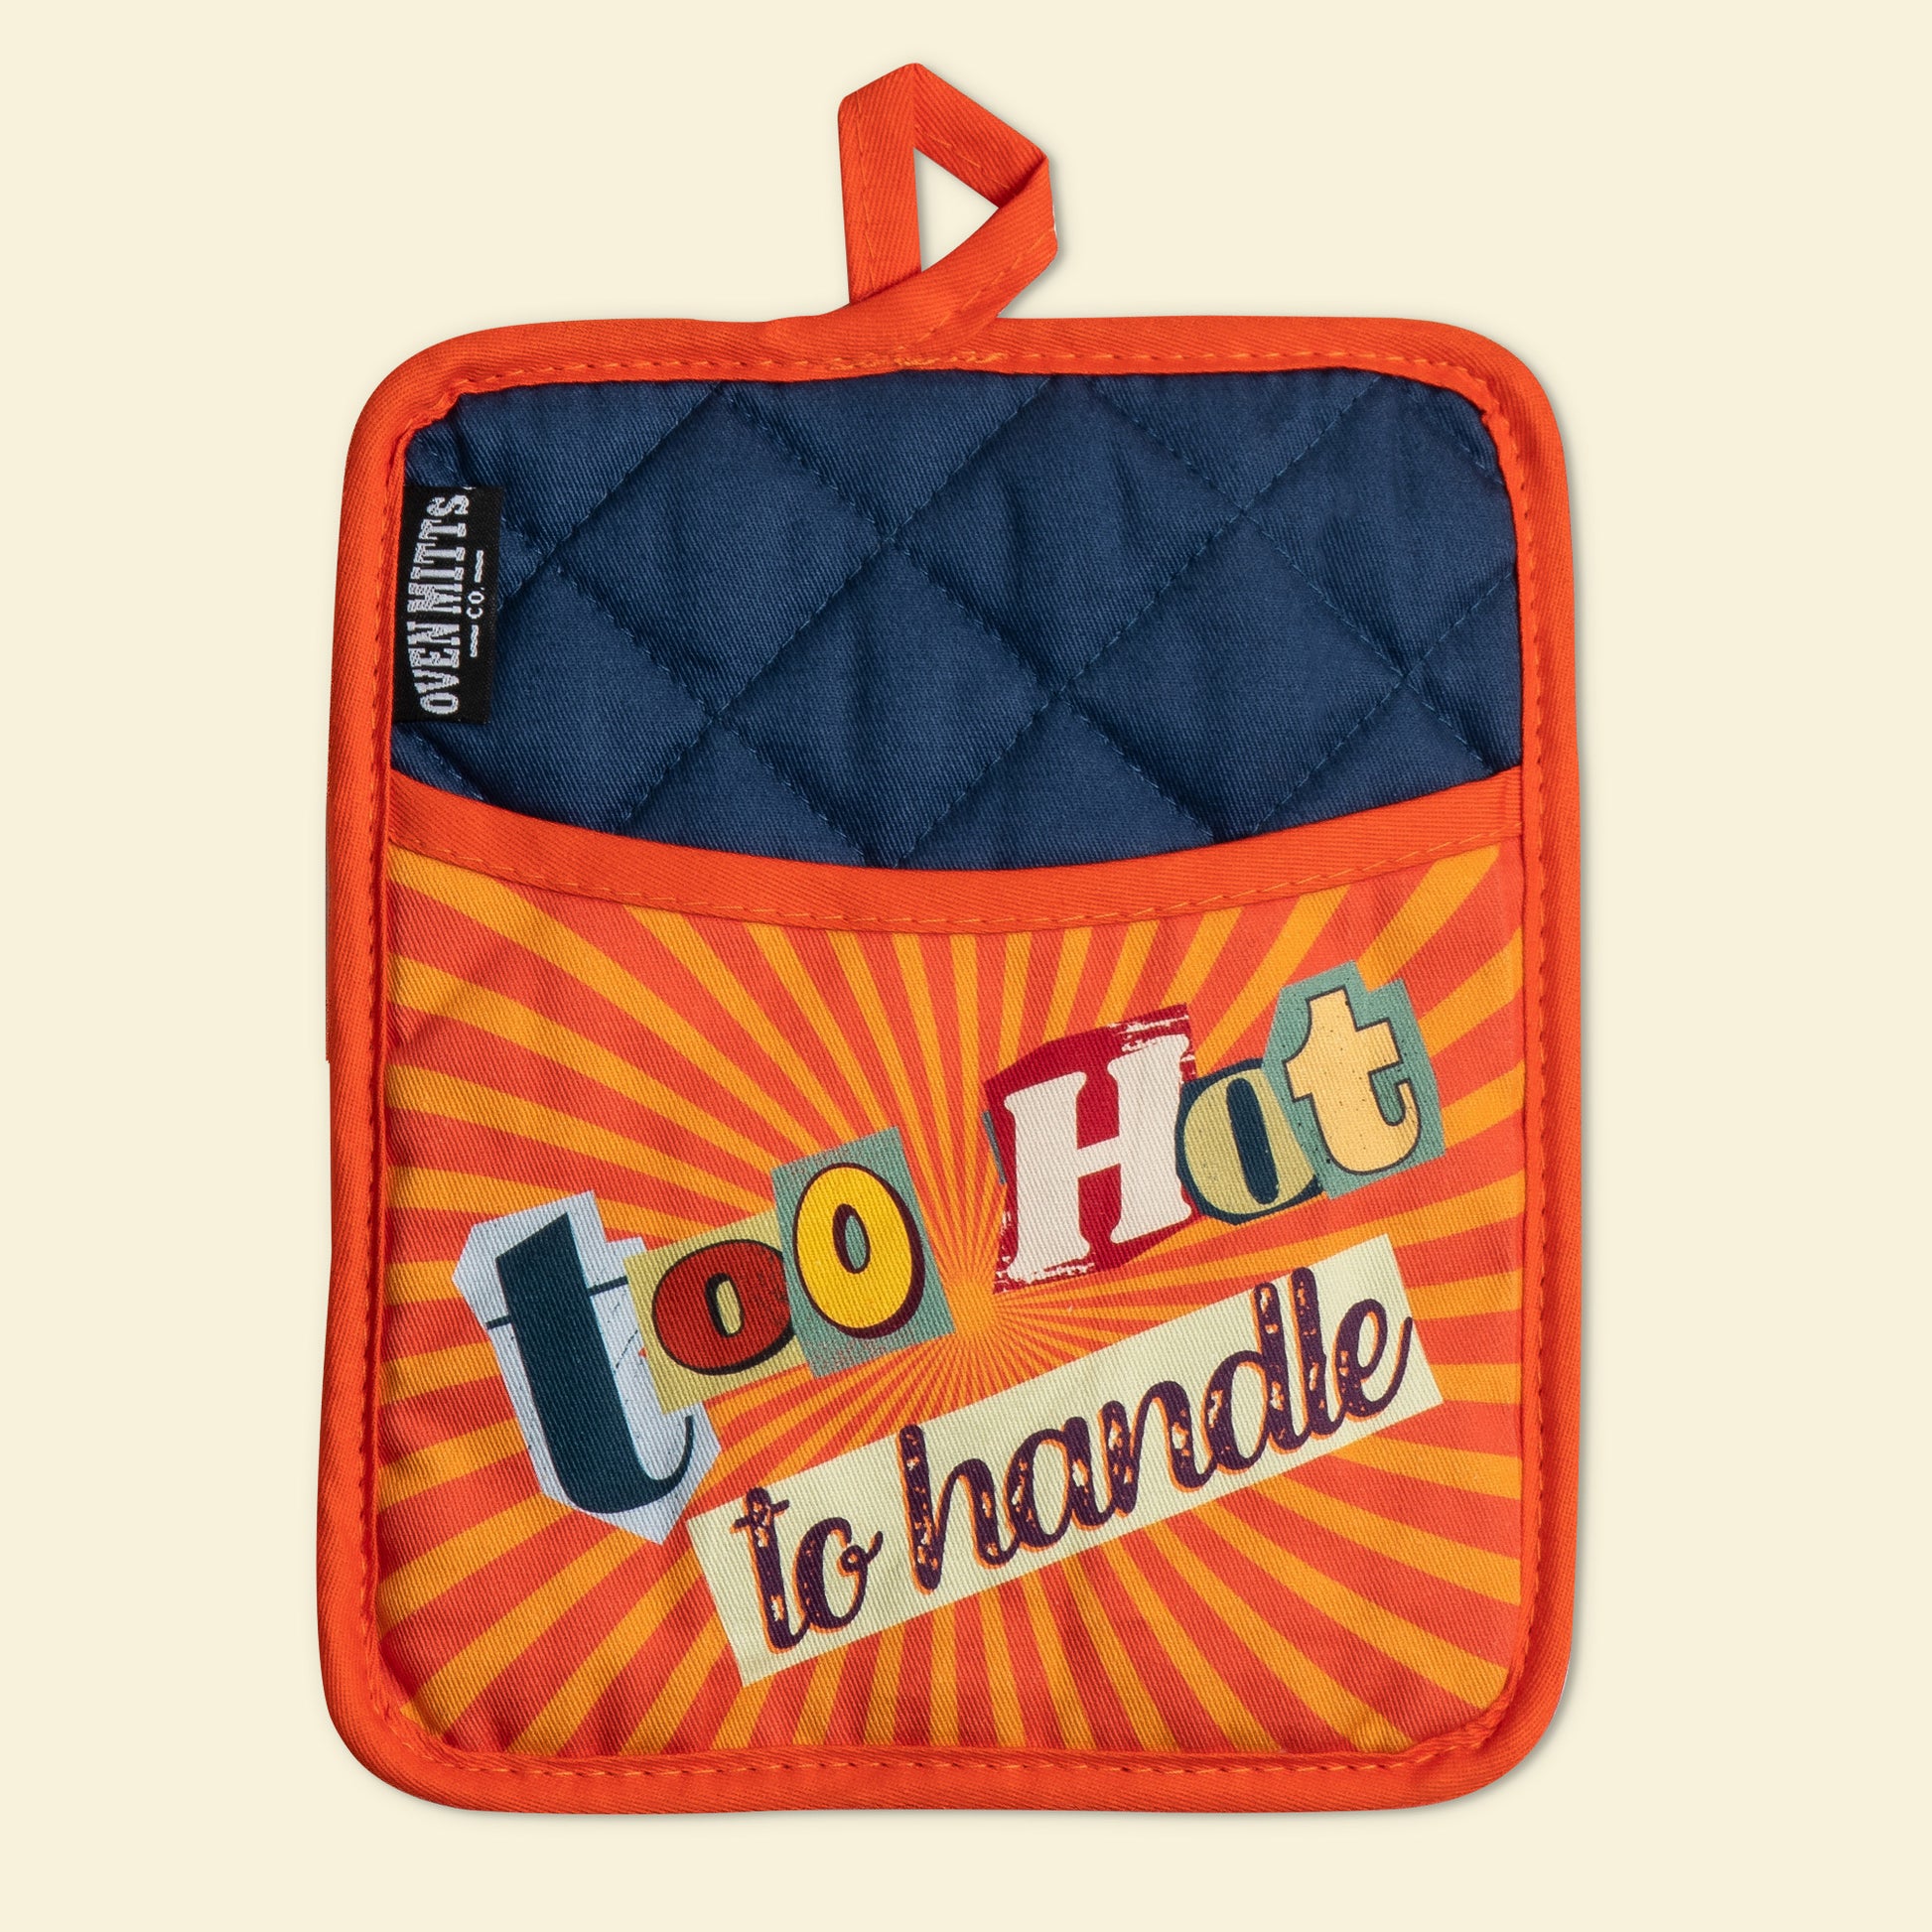 Too Hot To Handle Potholder with pocket, premium